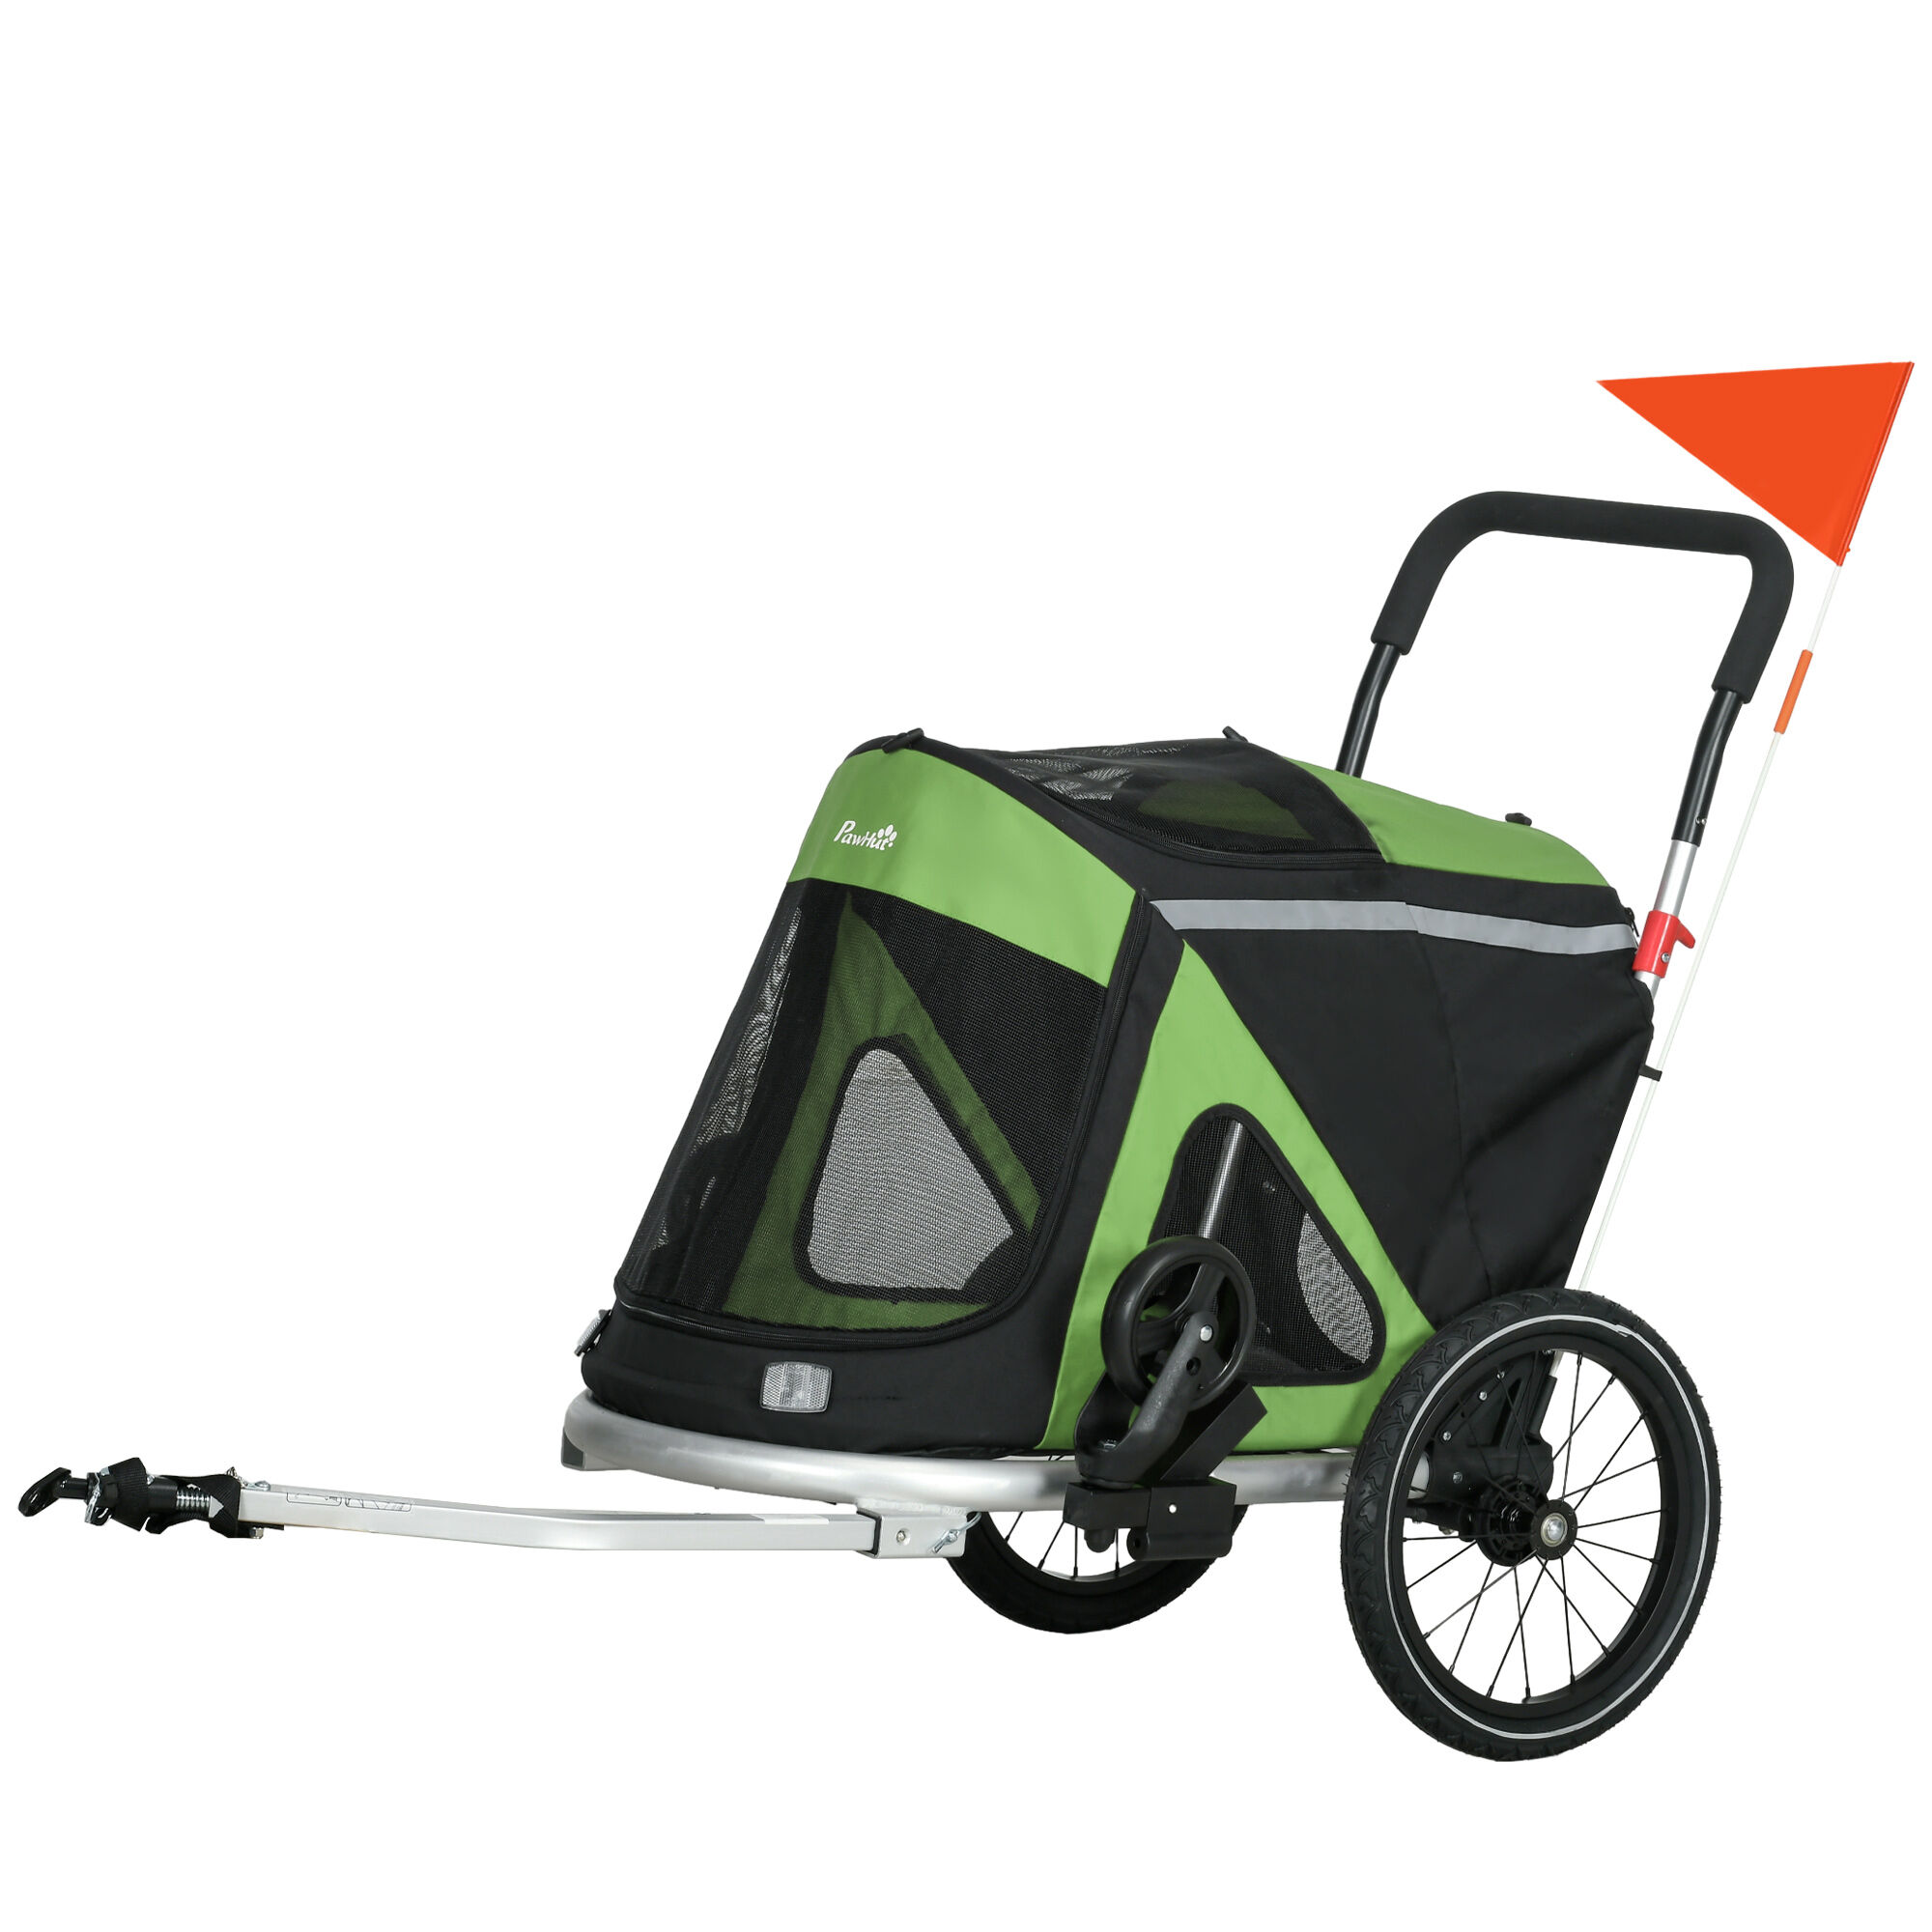 PawHut 2-in-1 Dog Bike Trailer & Pet Stroller, Aluminium, Foldable, for Medium Dogs, with Safety Flag, Green